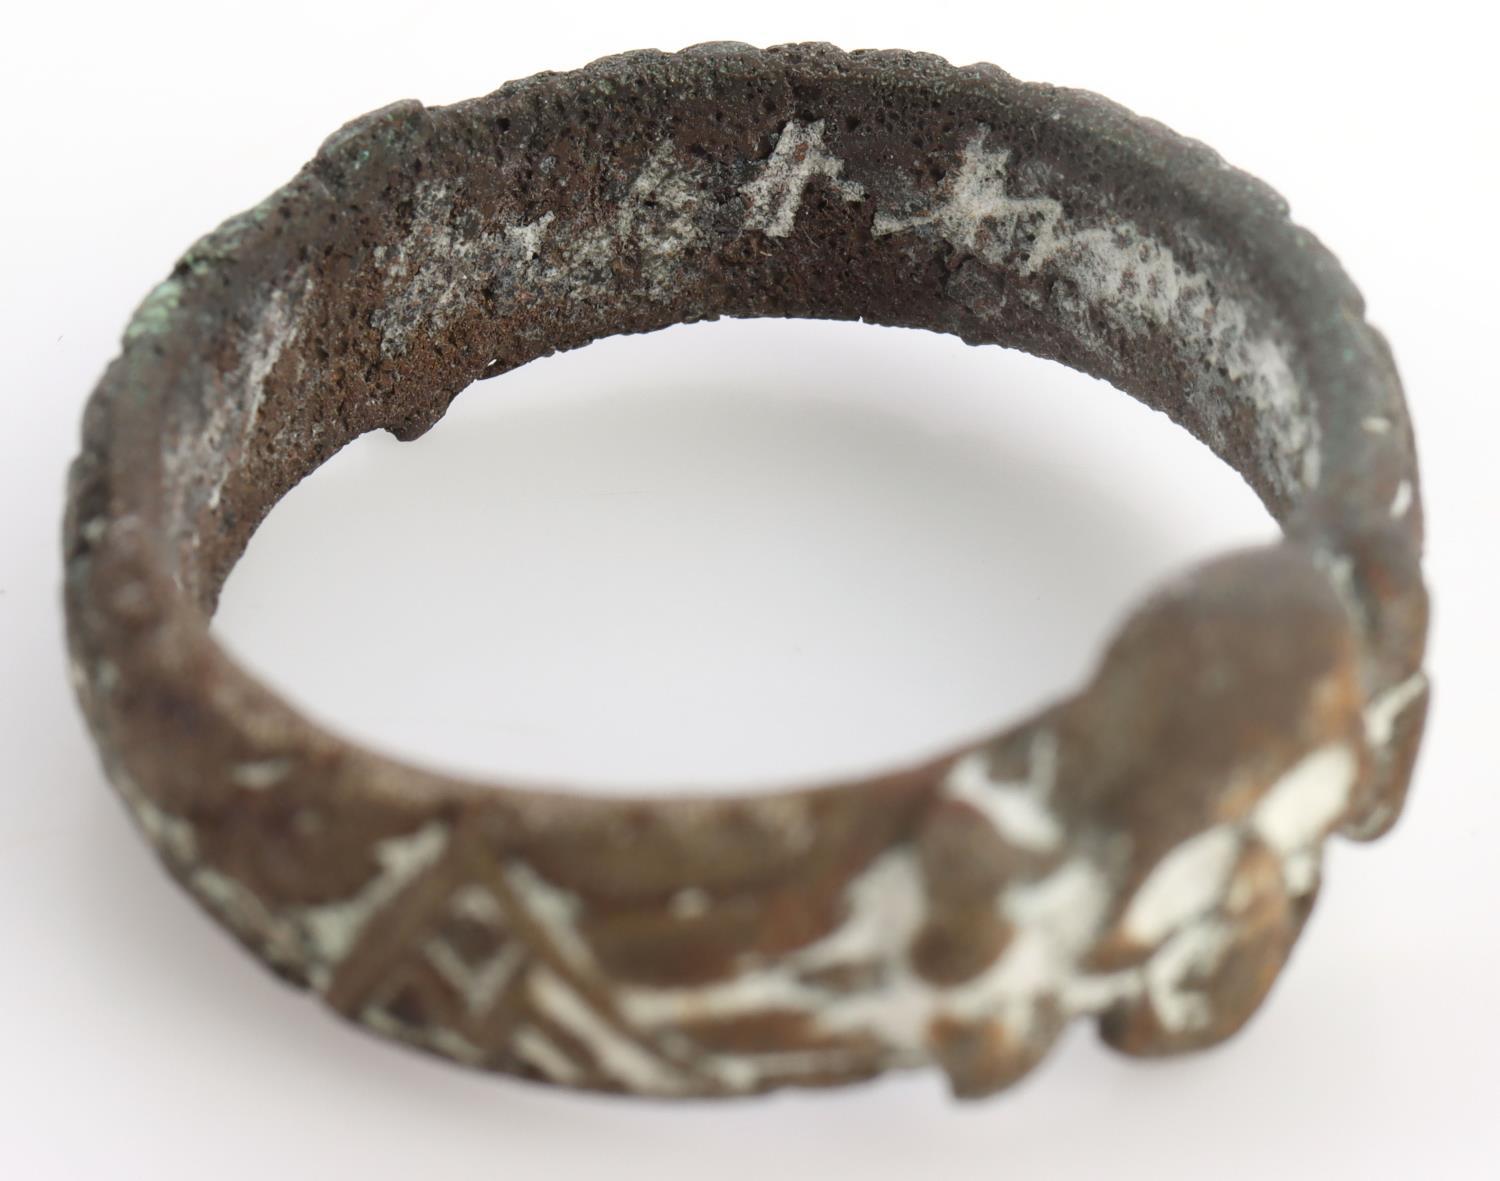 WWII GERMAN THIRD REICH SS HONOR RING EXCAVATED